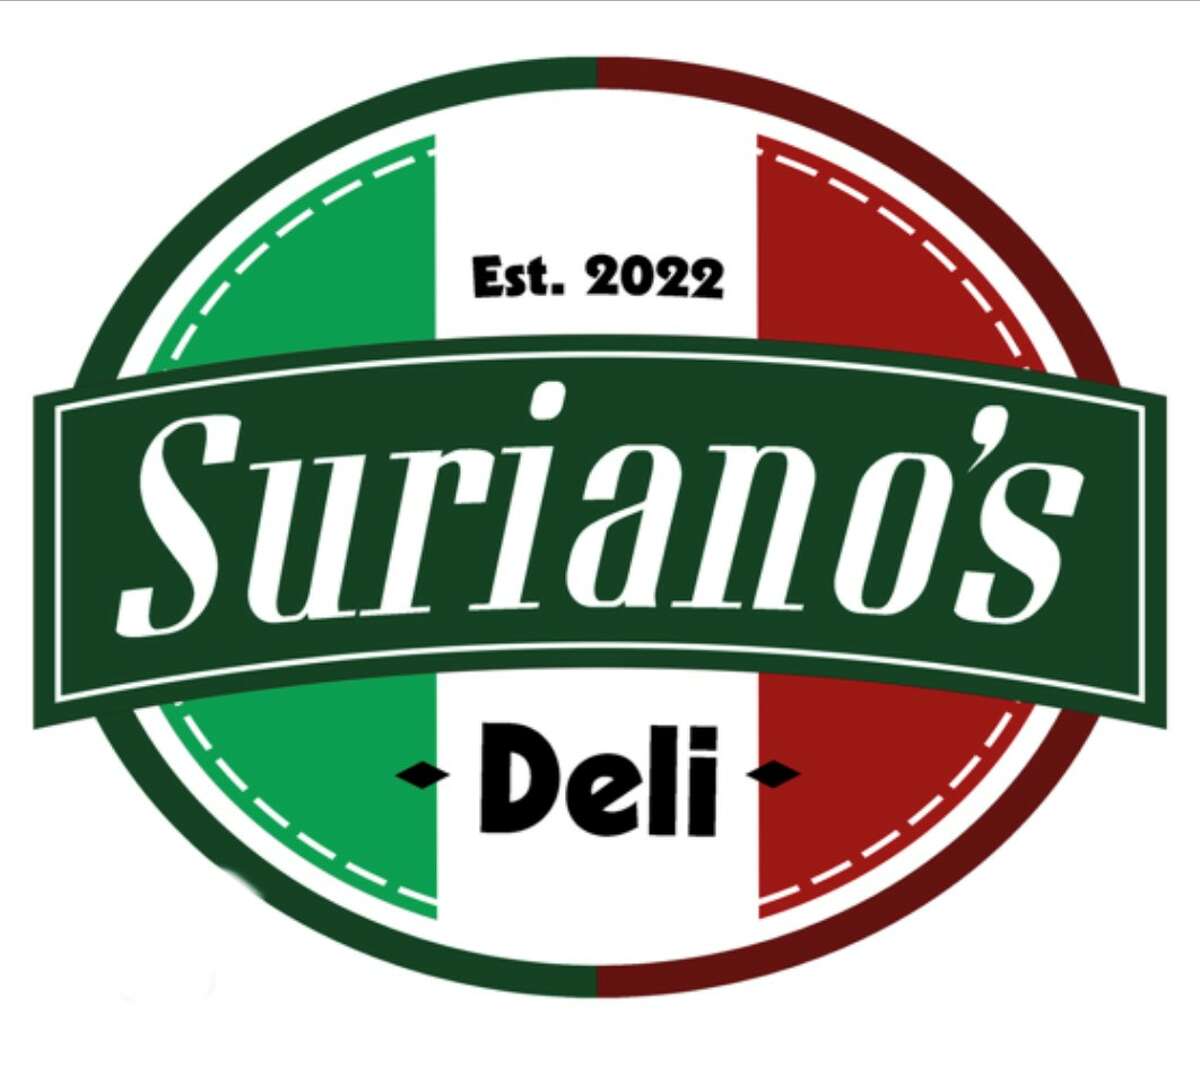 The logo for the new Schenectady deli, due to open by the end of June 2022.